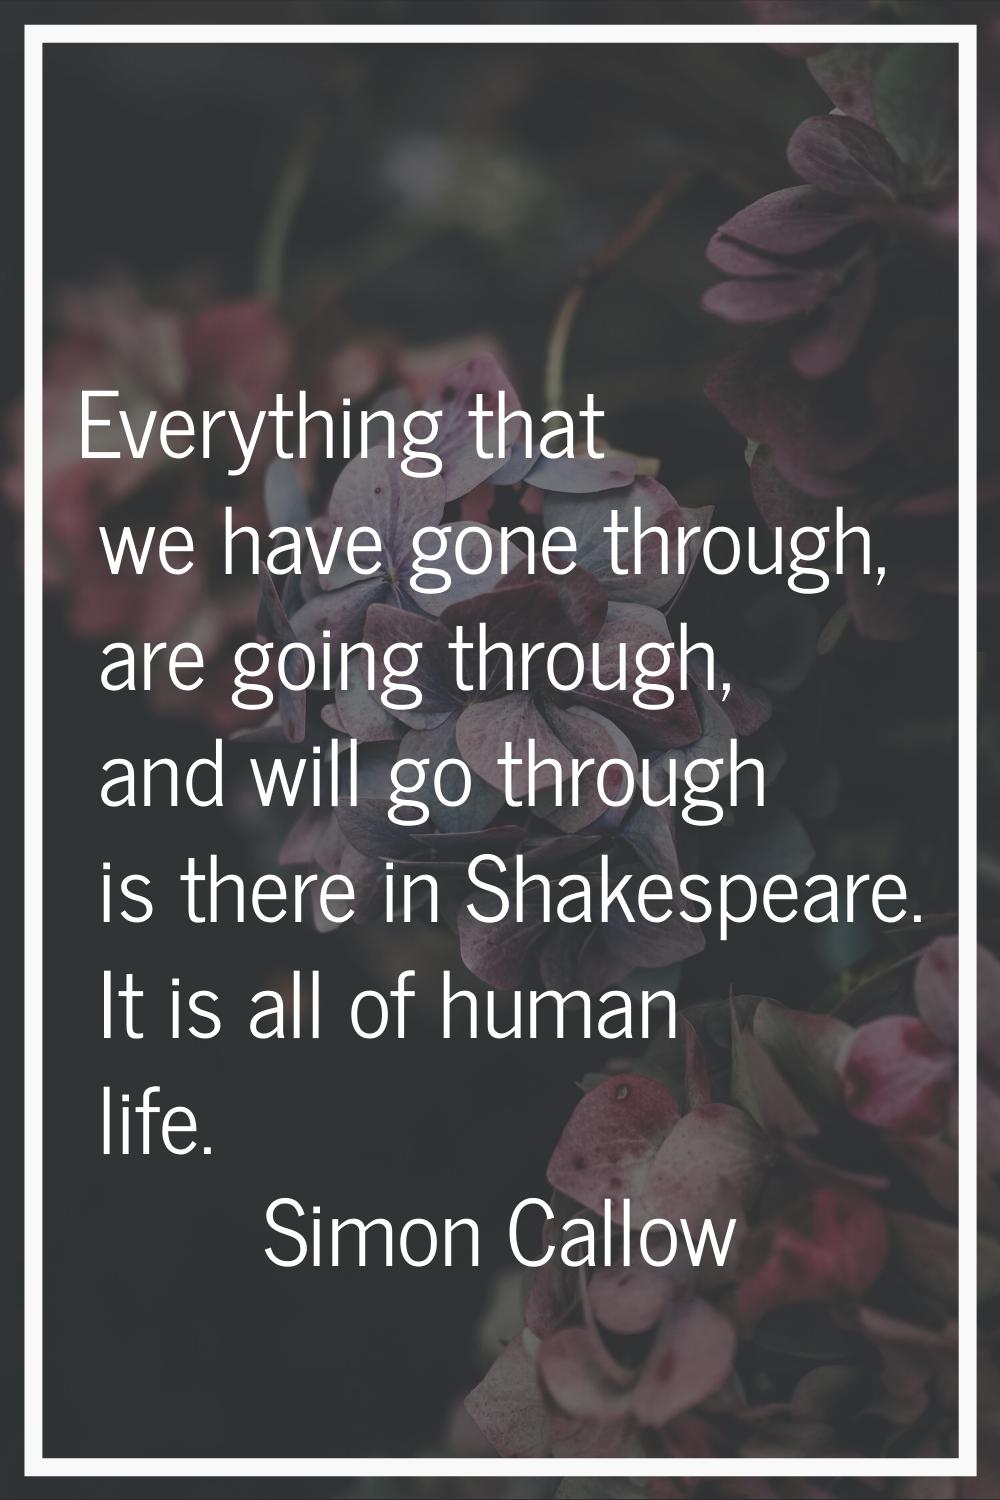 Everything that we have gone through, are going through, and will go through is there in Shakespear